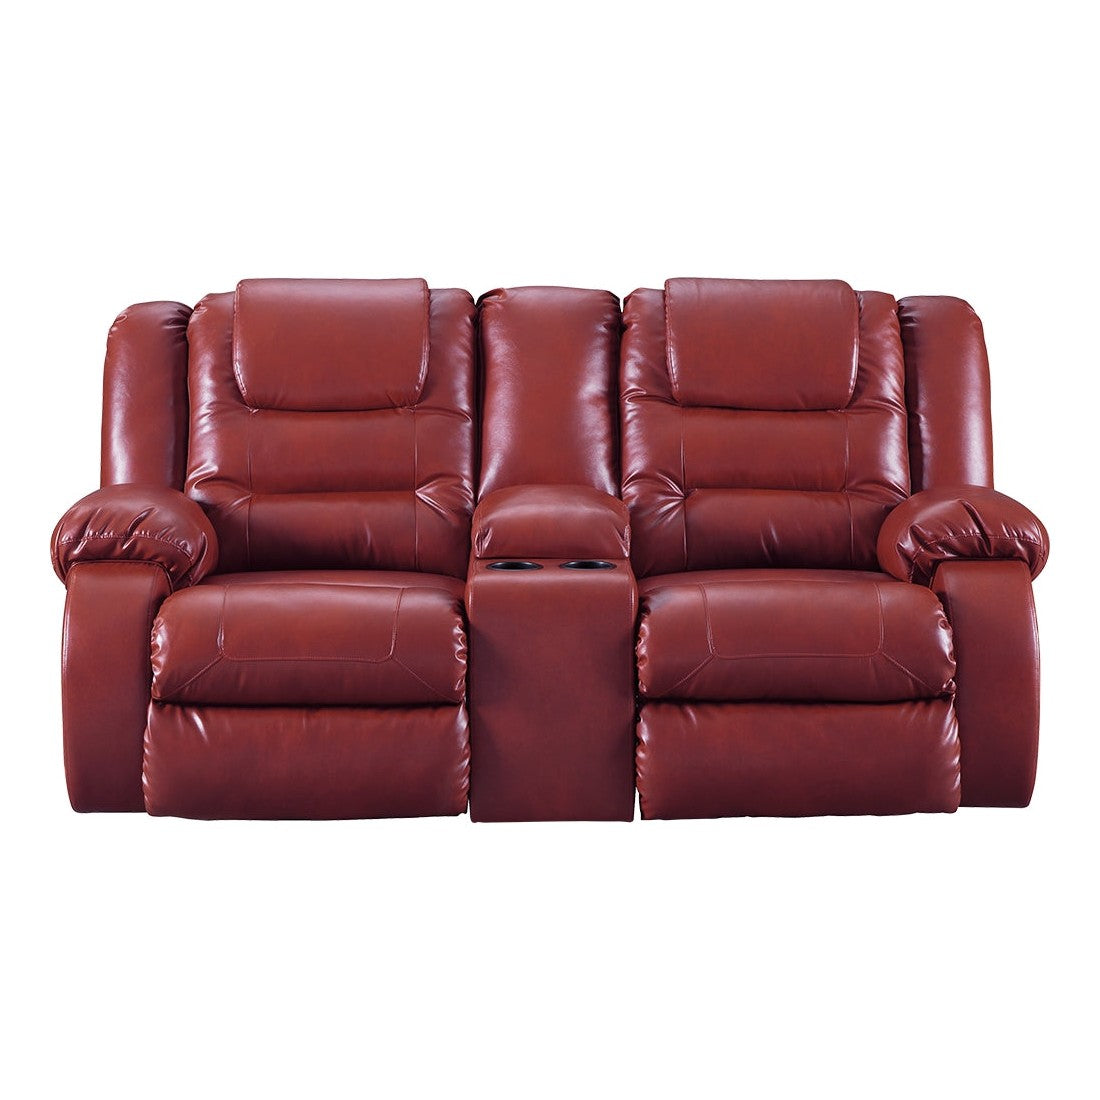 Vacherie Reclining Loveseat with Console Ash-7930694